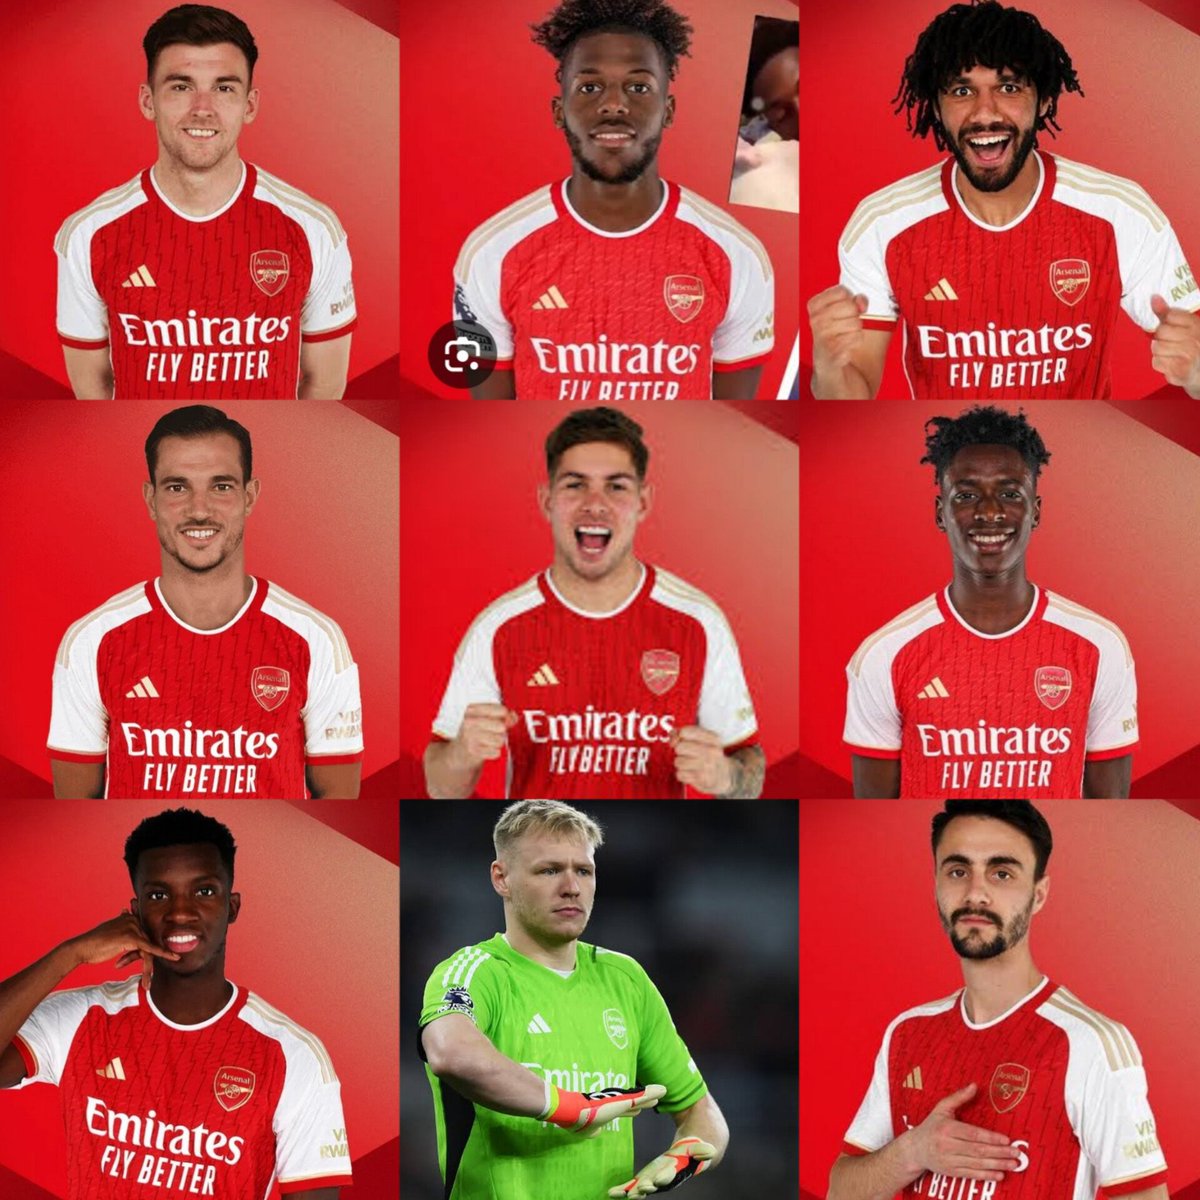 These players will either be sold or released over the summer
.
Odegaard will take the number 10 with one of the new signings taking the number 8. If Partey leaves there's a chance that Timber will take the number 5.
⚪🔴🐘